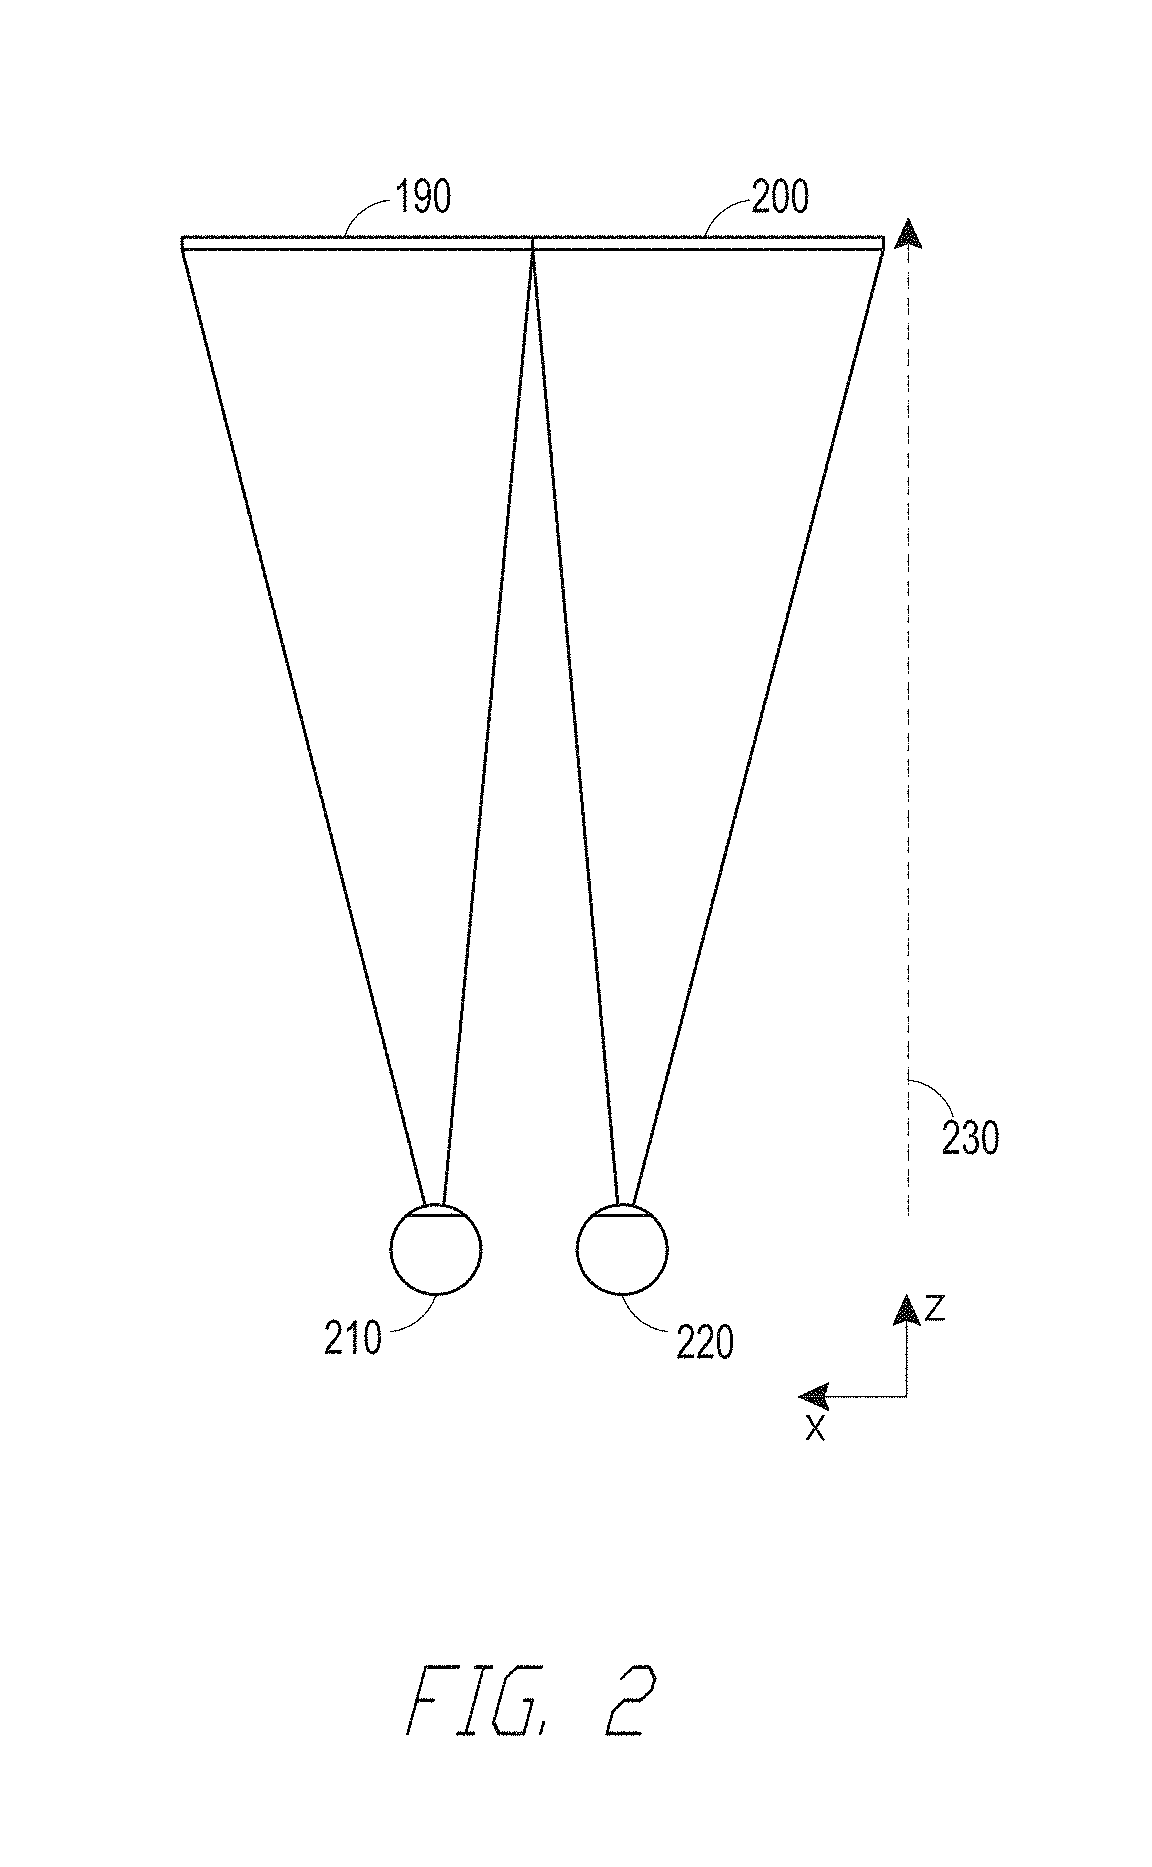 Augmented reality display comprising eyepiece having a transparent emissive display